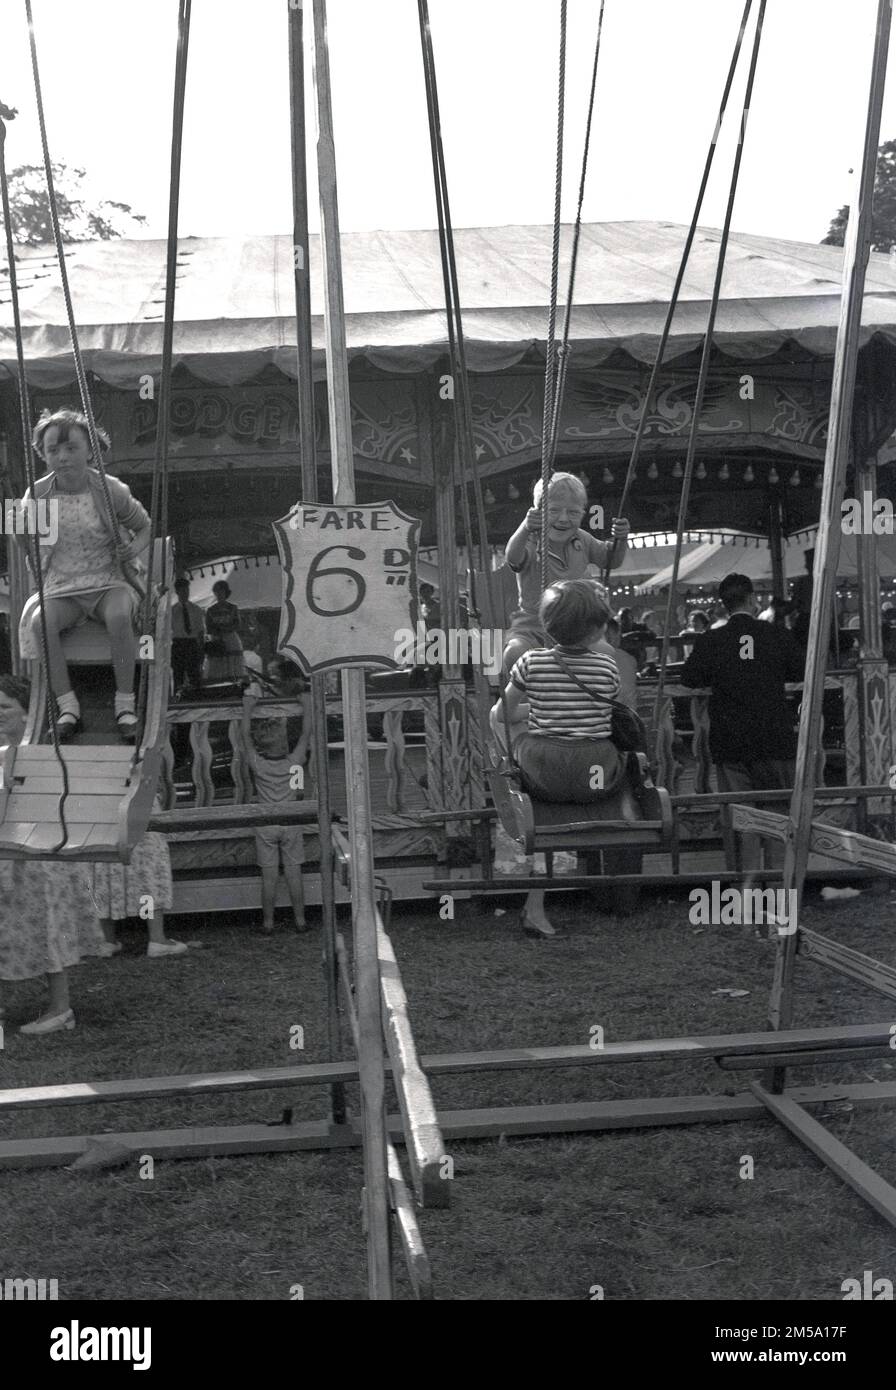 1950s, historical, young children on a swing ride at a funfair, price of ride 6D, England, UK. Stock Photo